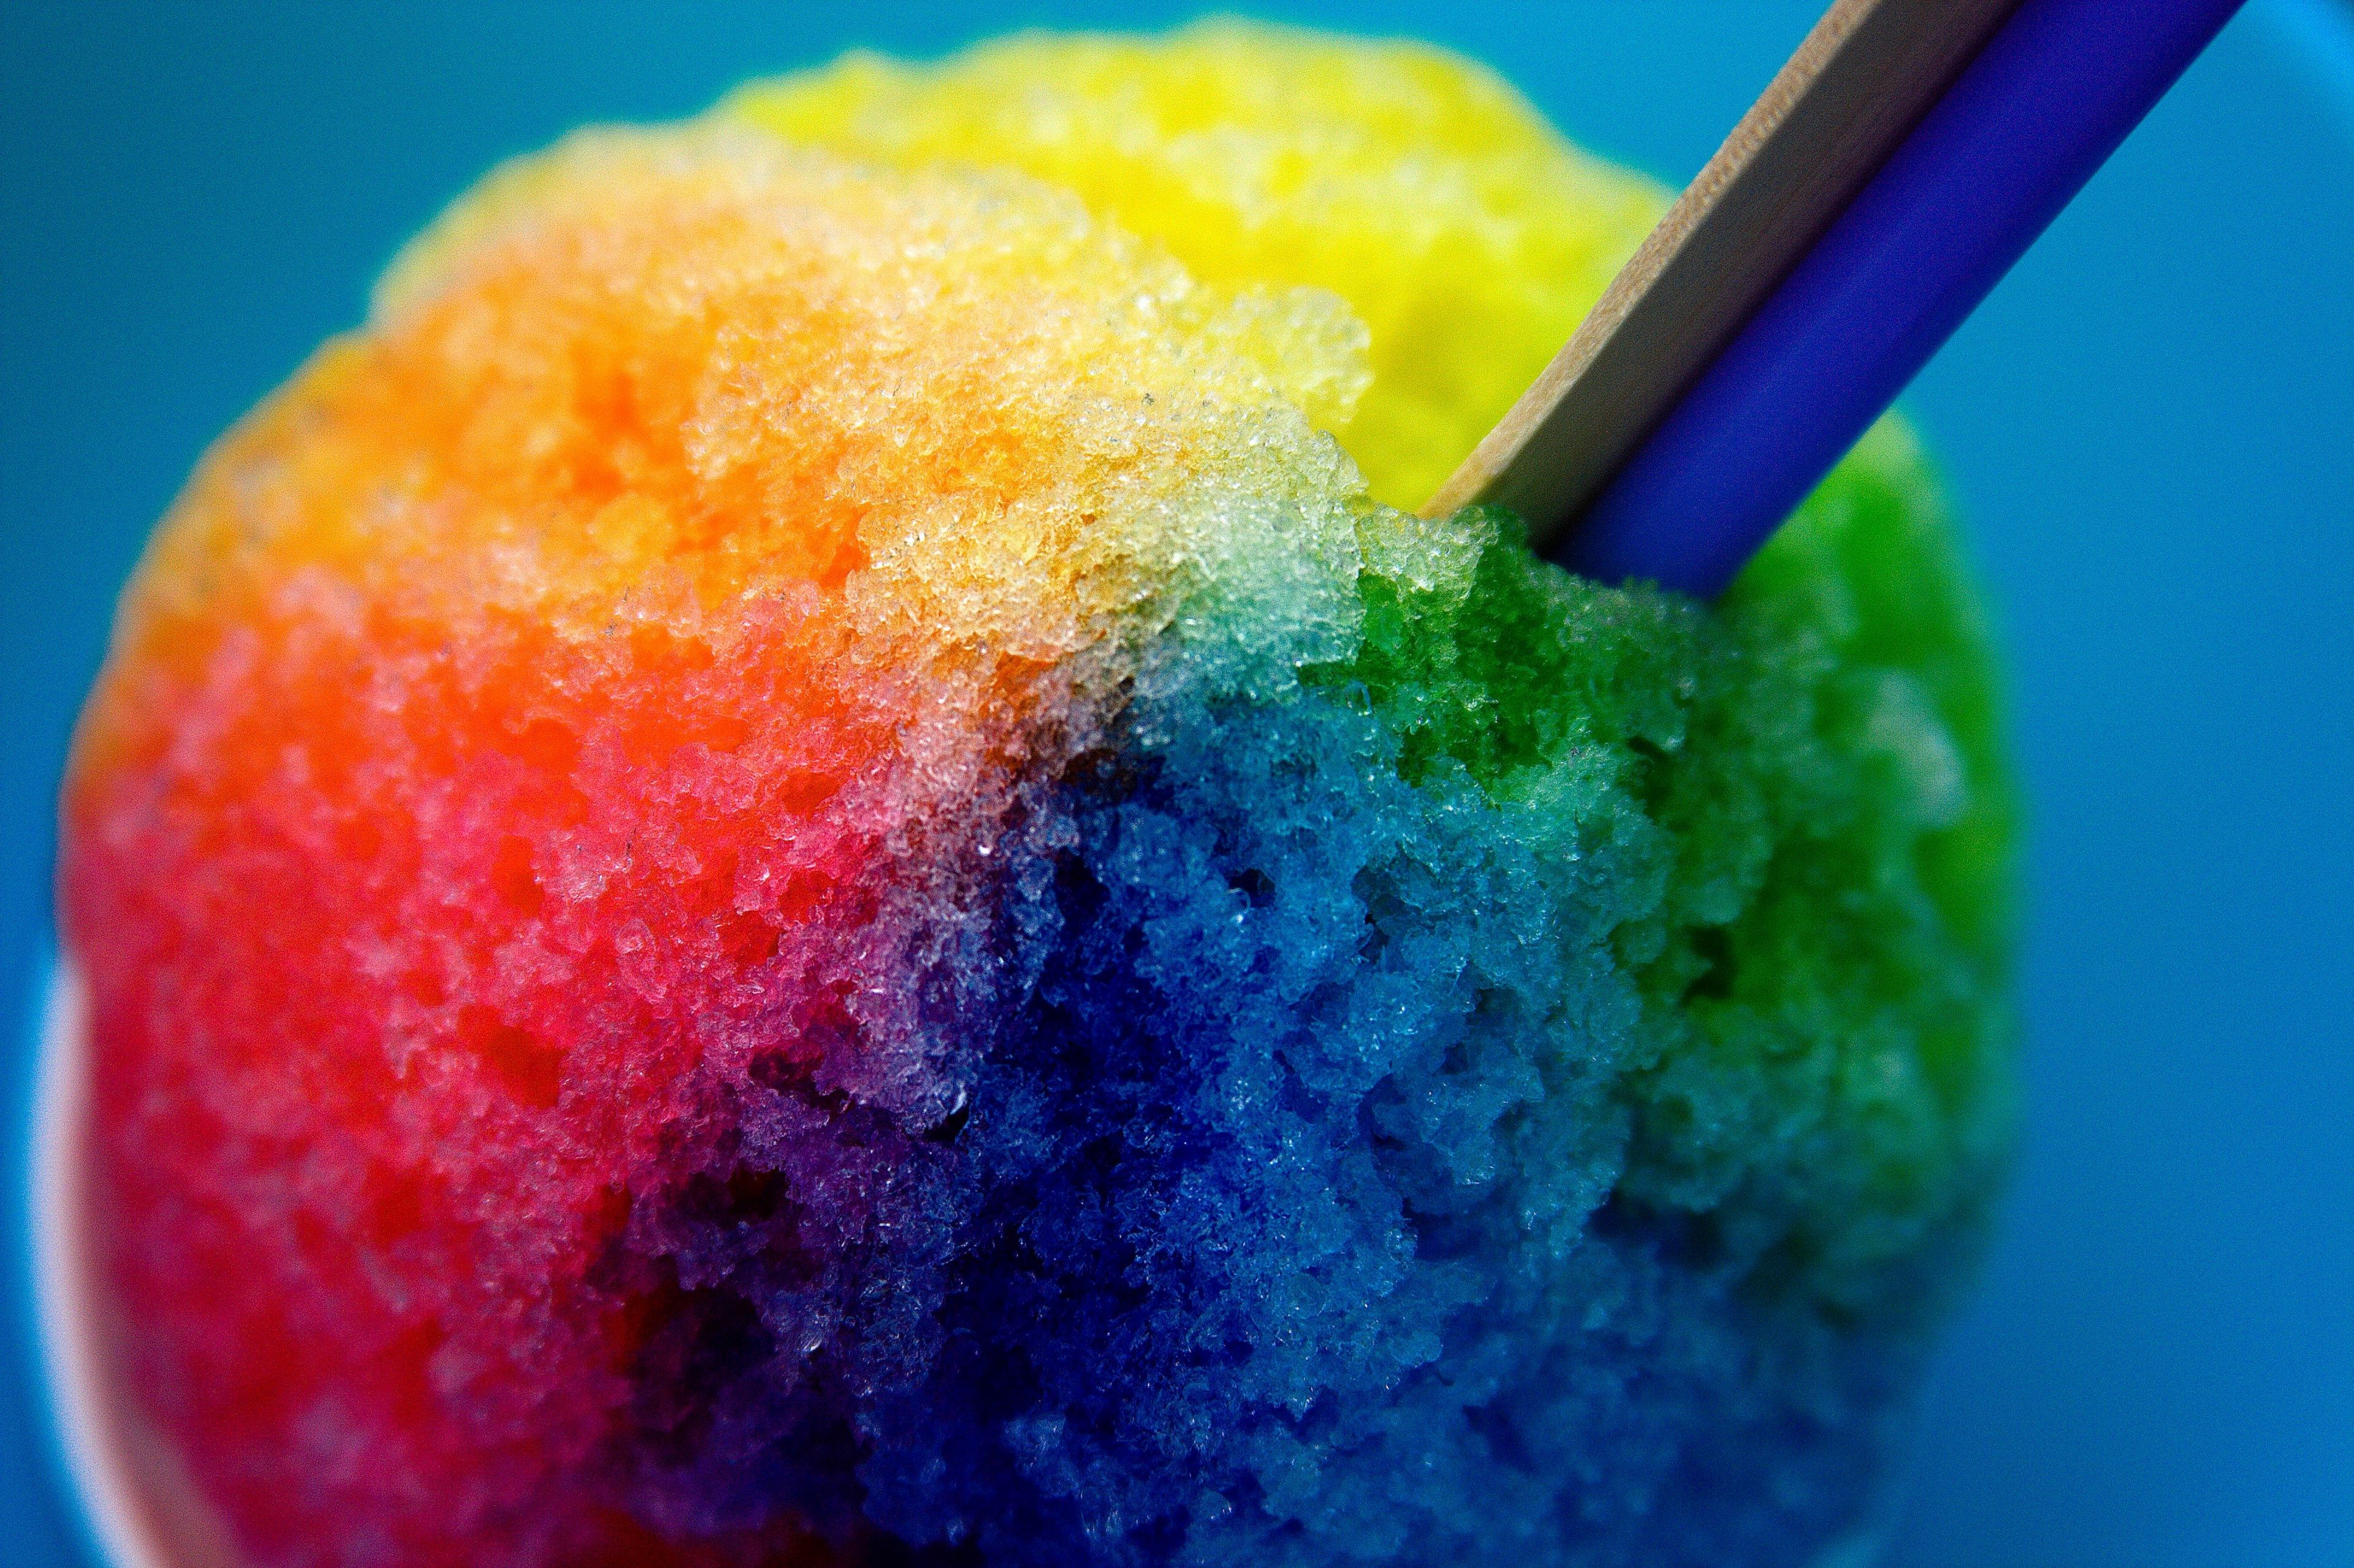 Snow Cone Wallpapers - Wallpaper Cave